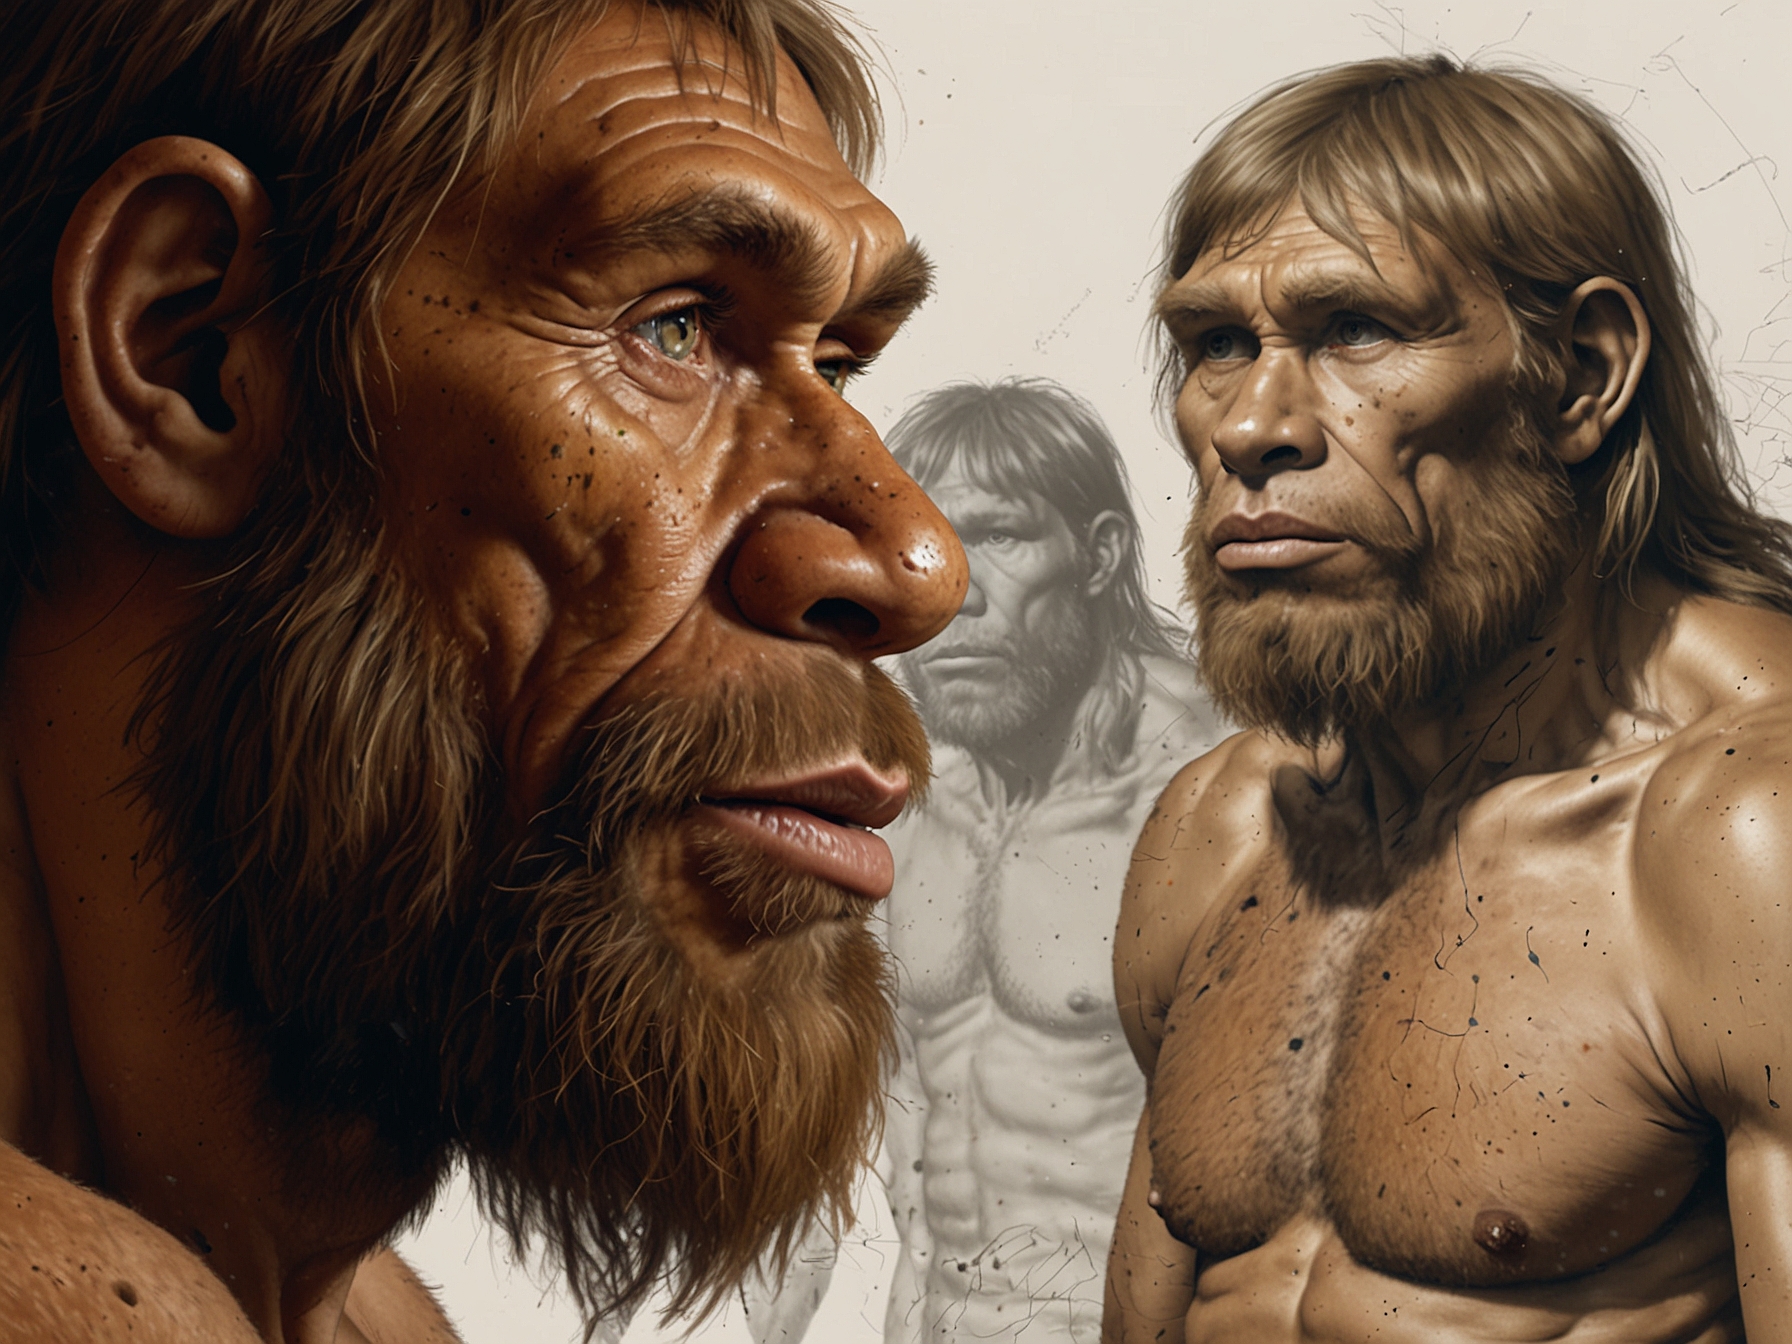 A detailed illustration showing the genetic relationship between modern humans and Neanderthals, highlighting the missing Neanderthal Y chromosome in the modern human genome.